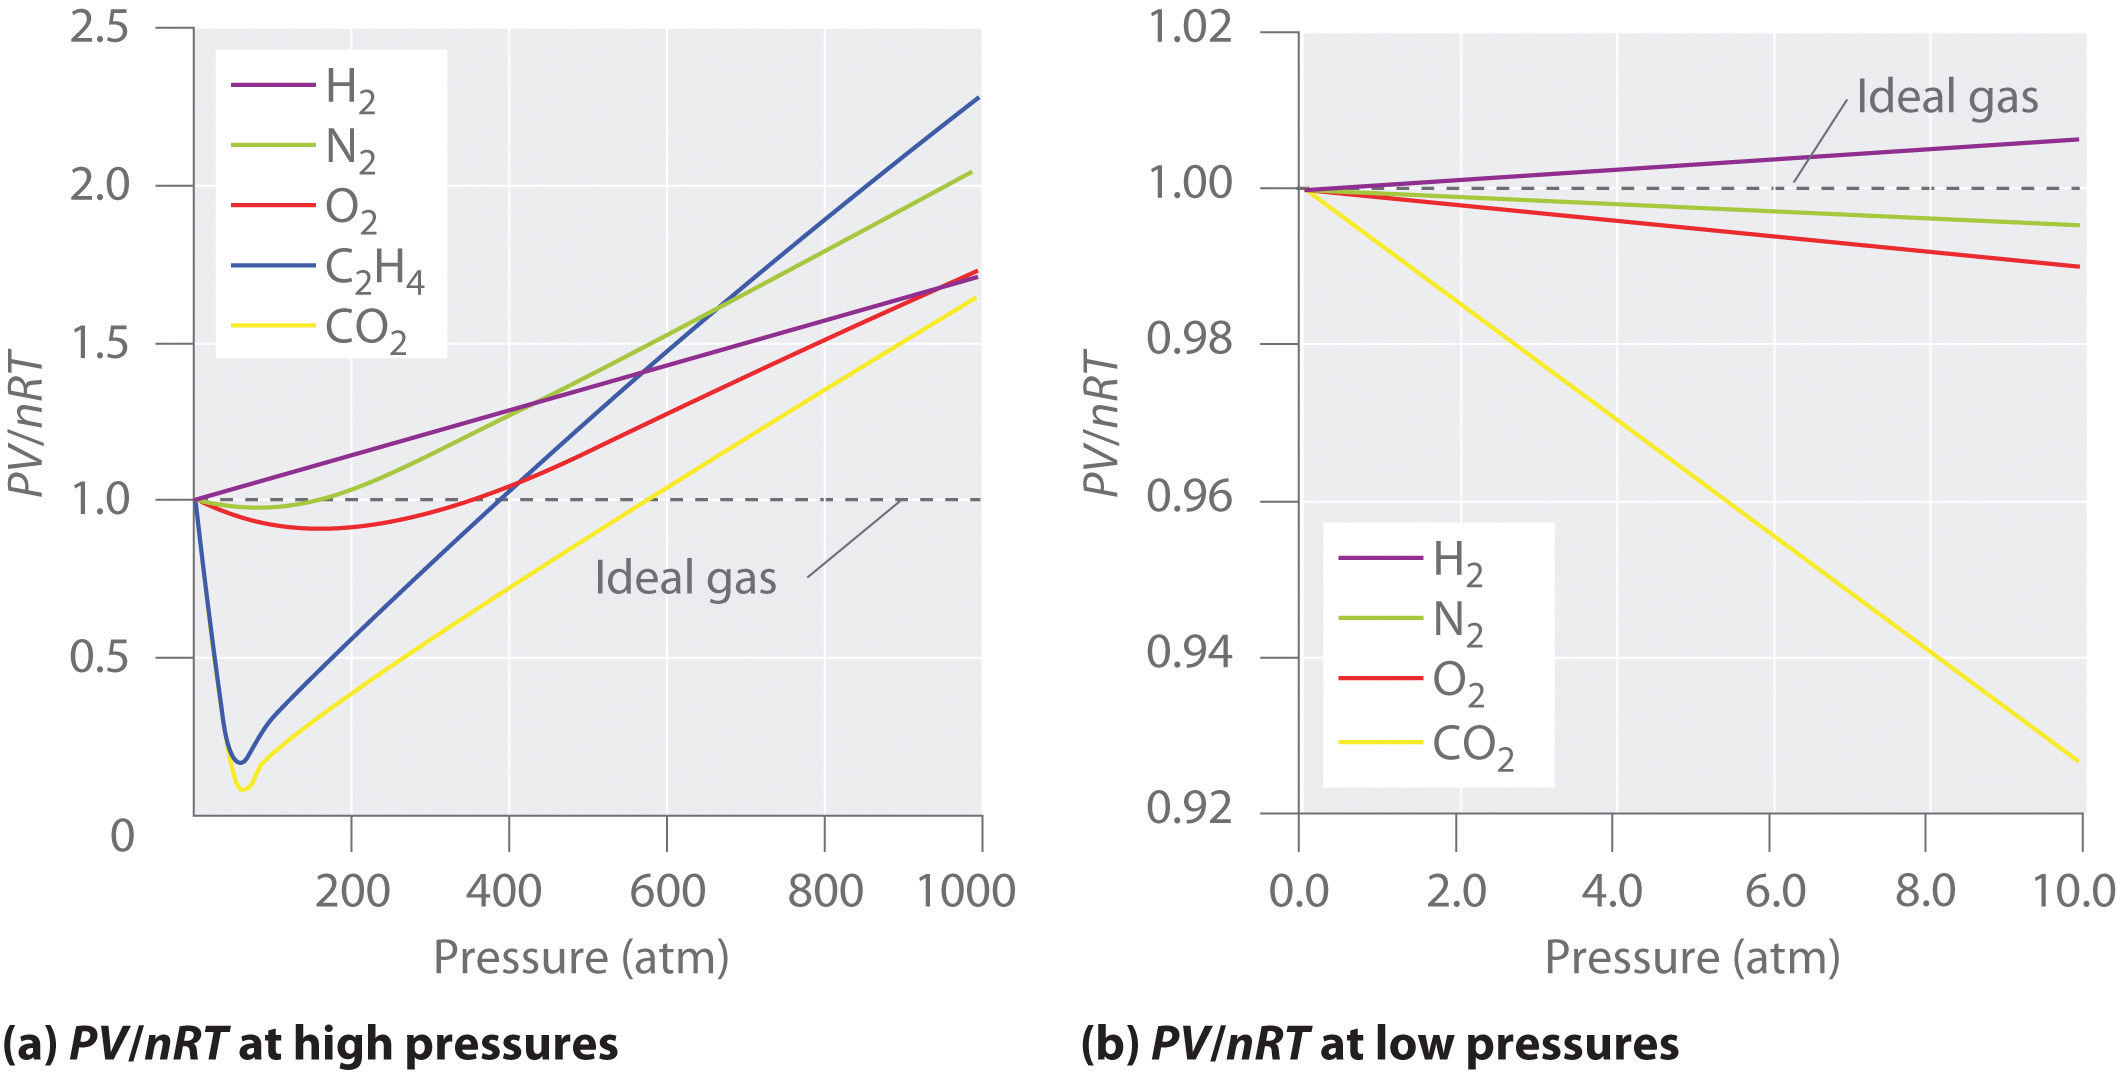 A real gas most closely approaches the behavior of an ideal gas under conditions of